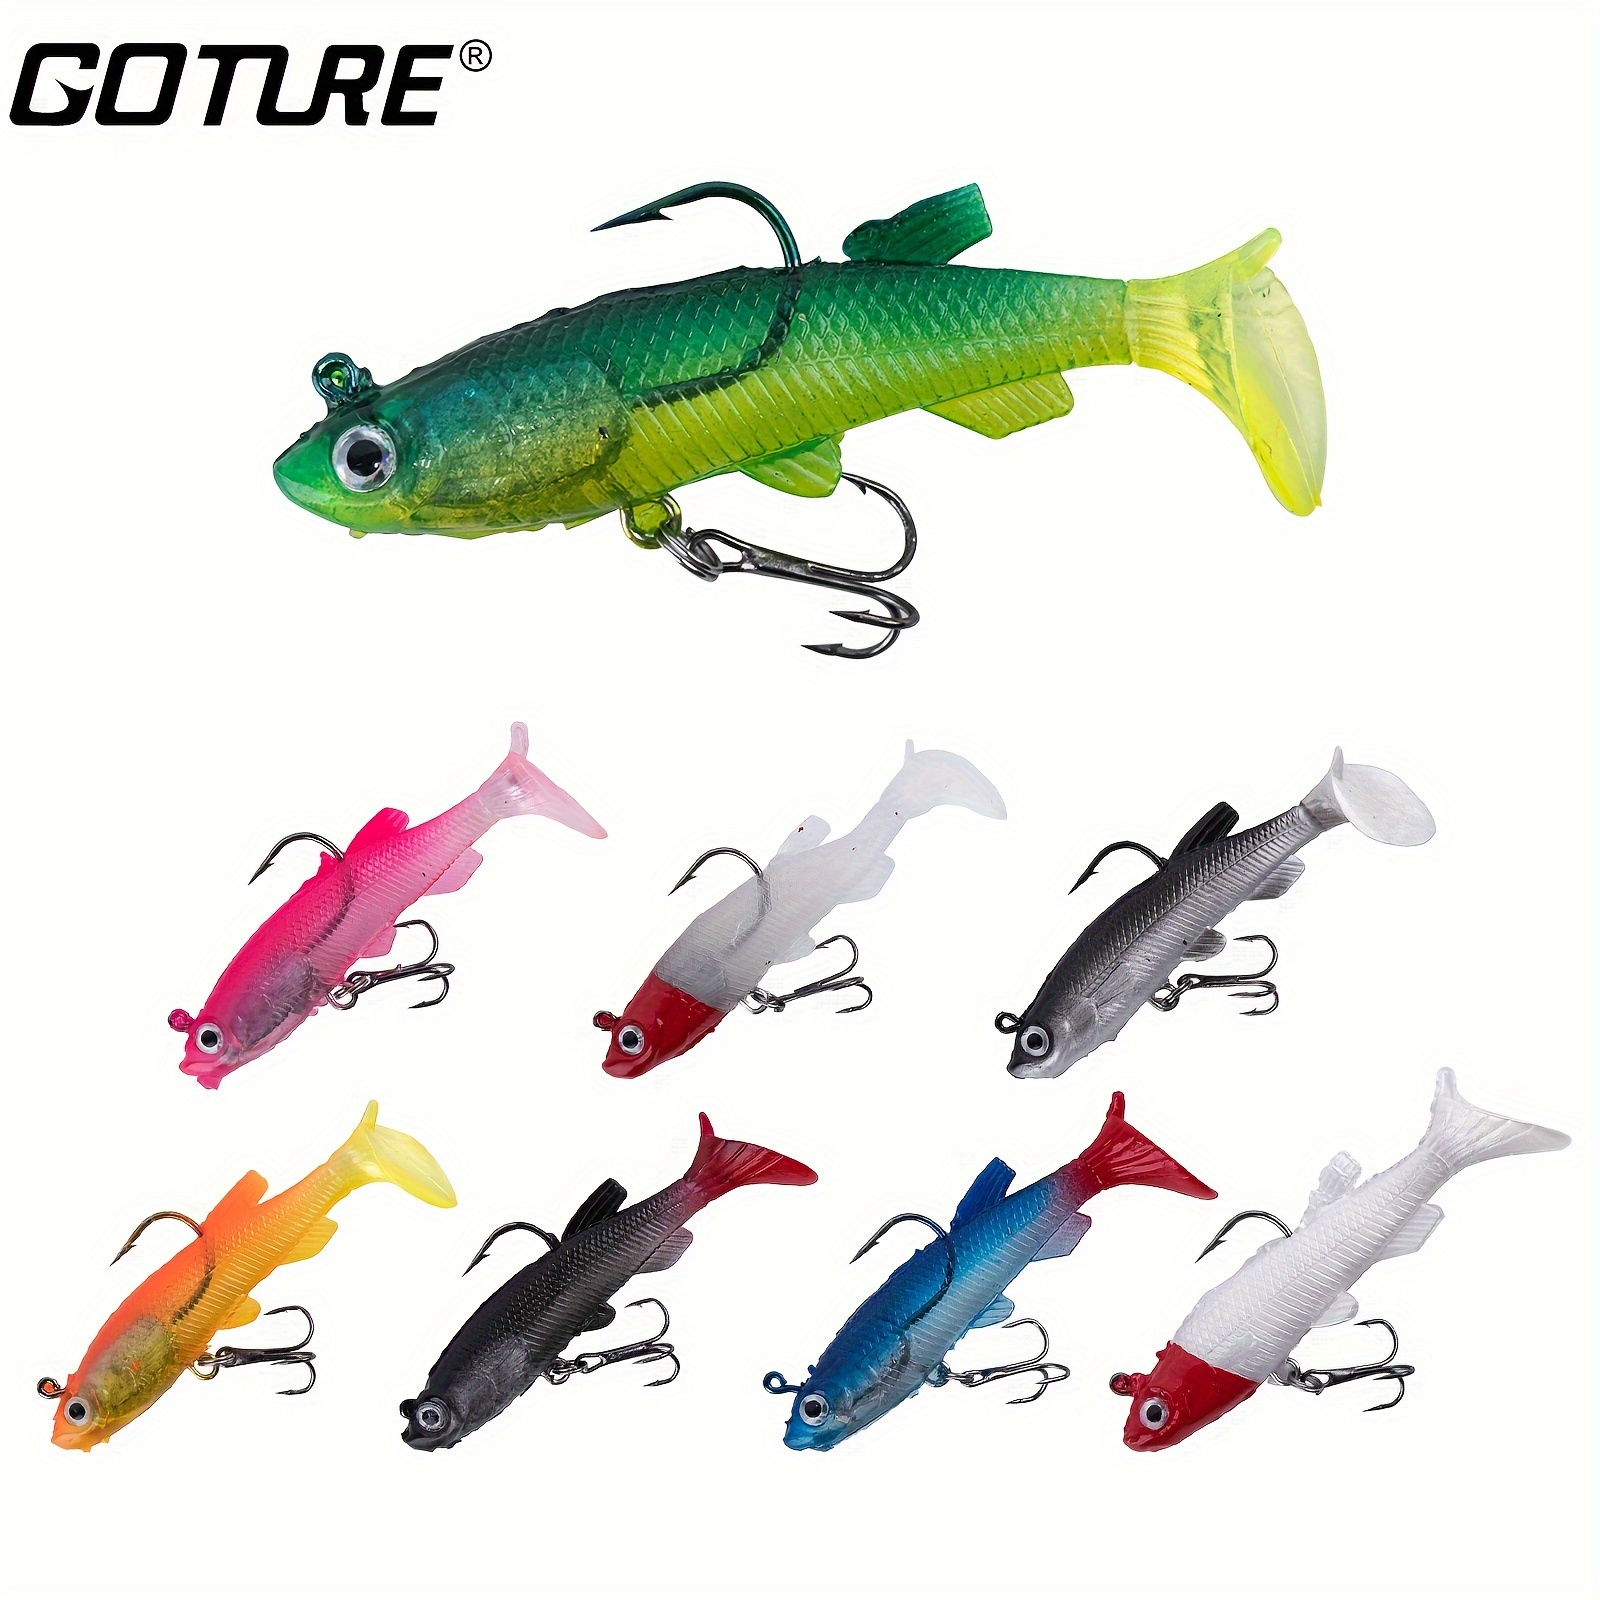 Dr.Fish Soft Fishing Lures 8cm/14g Jig Head Swimbaits 5pcs for Bass Fishing  Paddle-Tail Fishing Lures for Pike Trout Pre-Rigged Dropshot Lure with